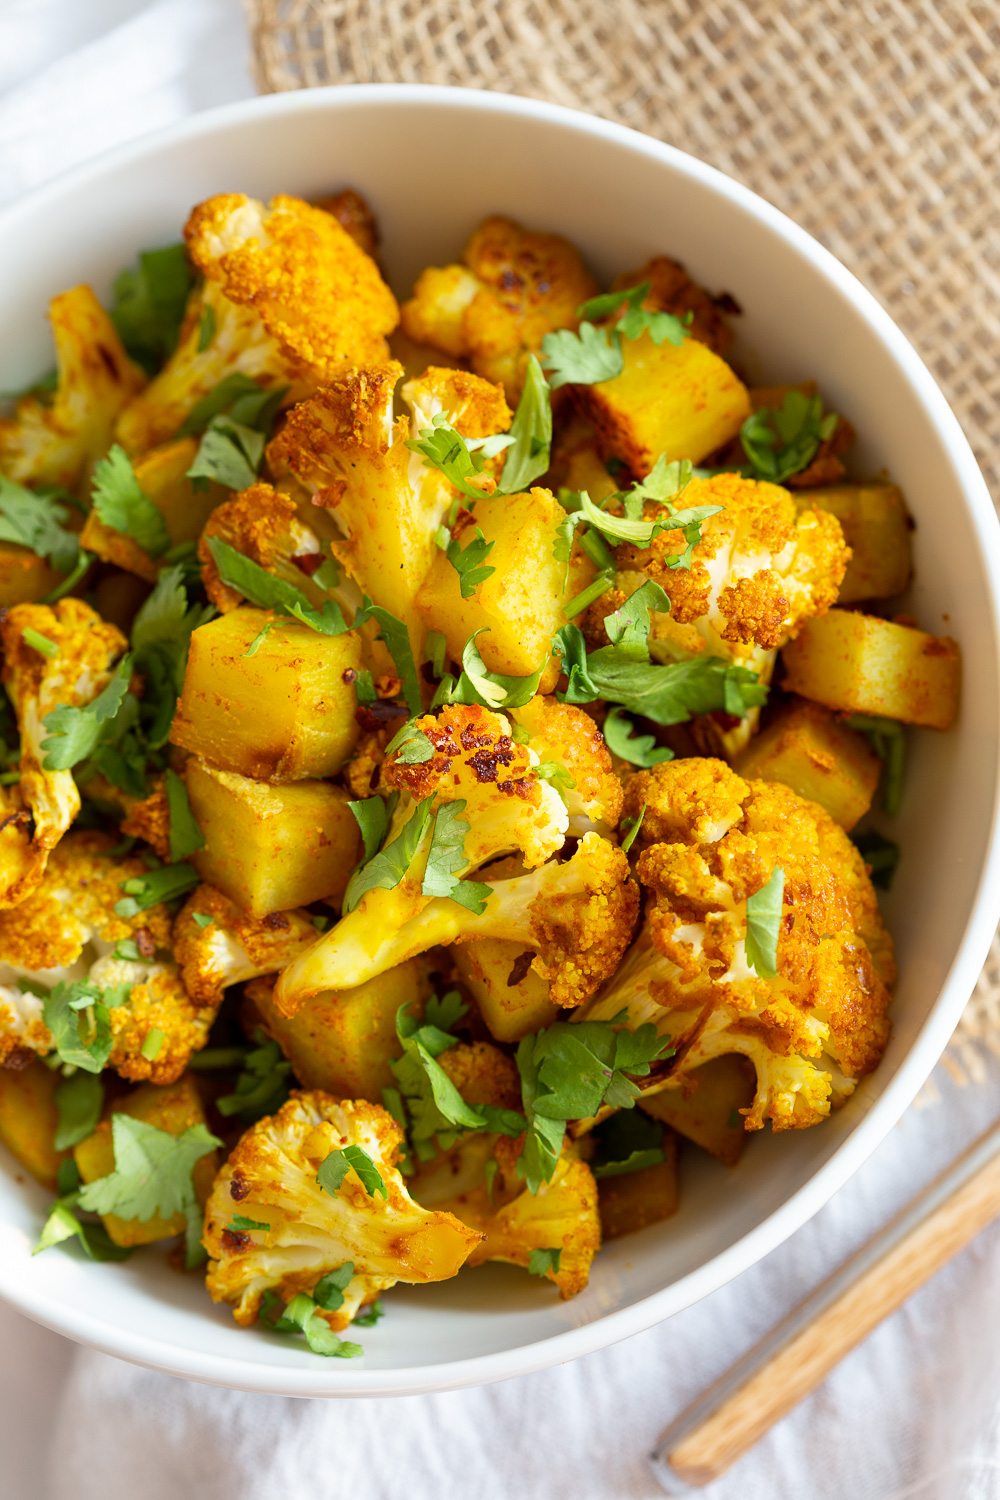 Baked Aloo Gobi - Indian Spiced Potato Cauliflower Bake. 10 Mins Active. Toss with spices, put it to bake, and done! No Standing around, no Mushy Cauliflower! Same Amazing Indian flavor and excellent texture. Tips to make the Best Aloo Gobi Subzi that bakes perfectly every time! #Vegan #Glutenfree #Soyfree #Nutfree #VeganRicha #aloogobi #Recipe